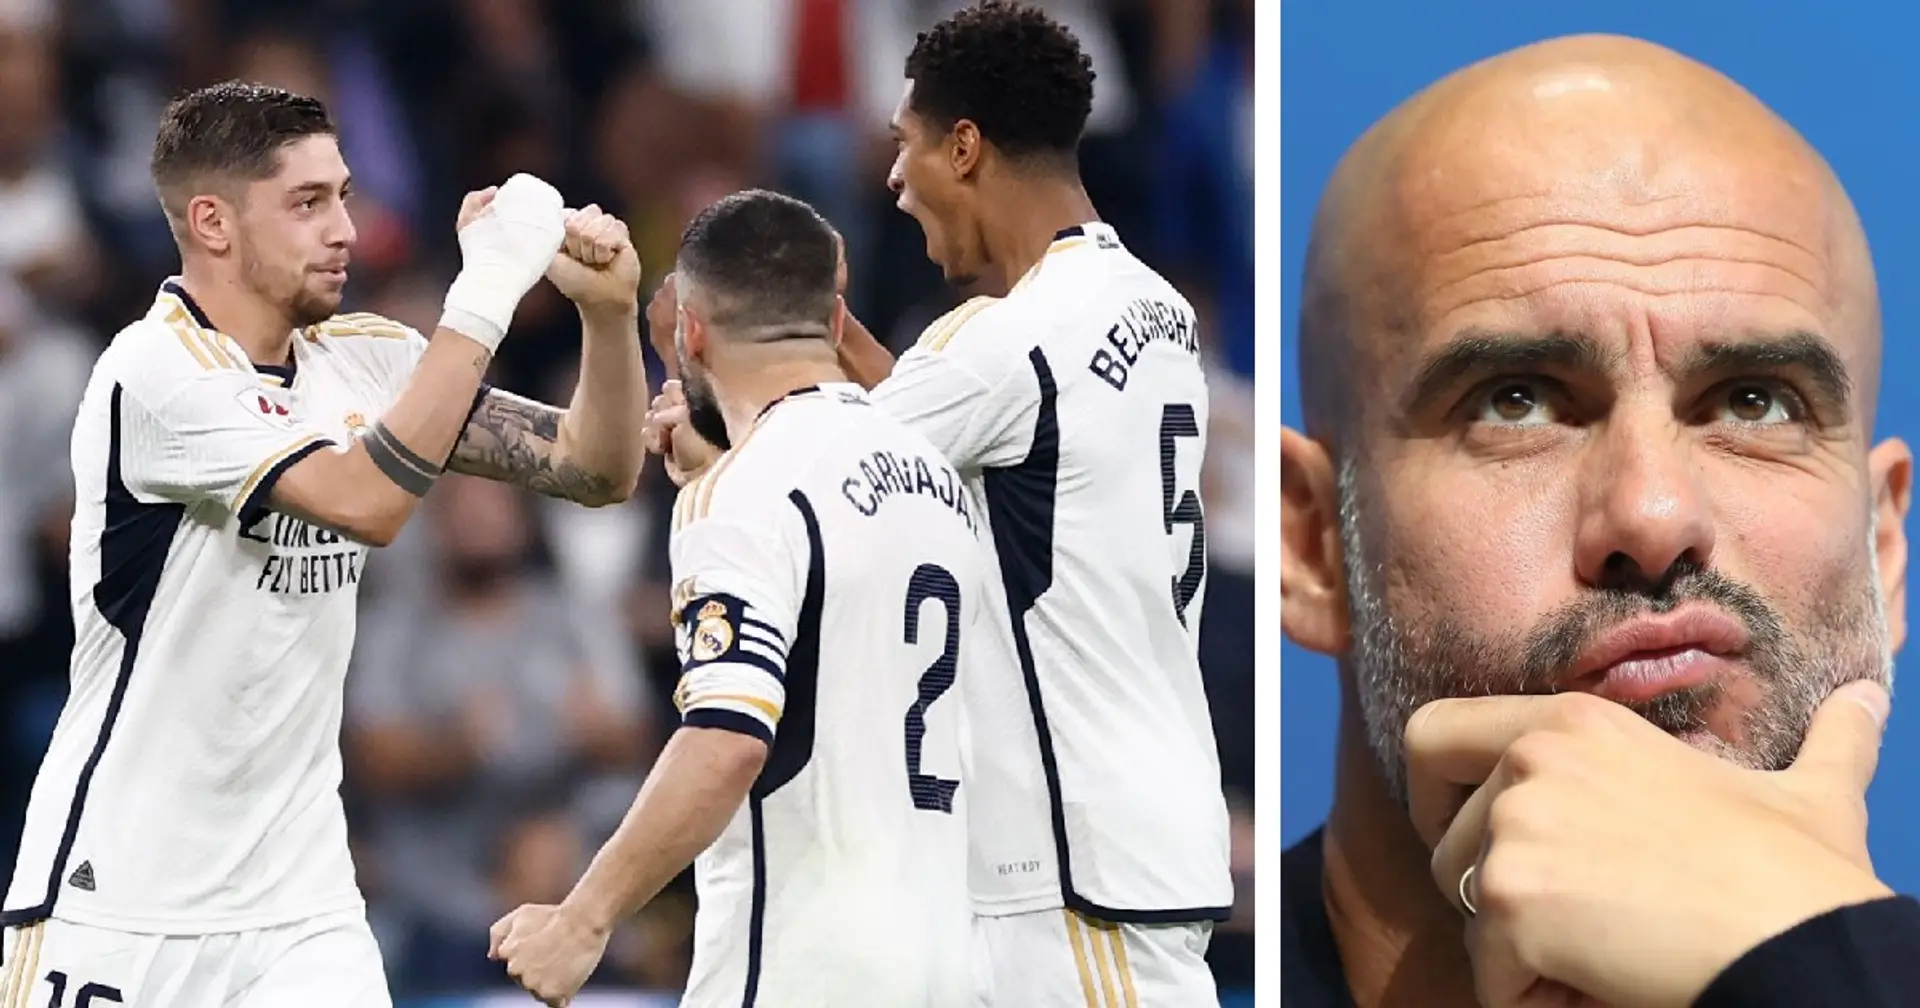 Guardiola dares Real Madrid & 2 more big stories you might've missed